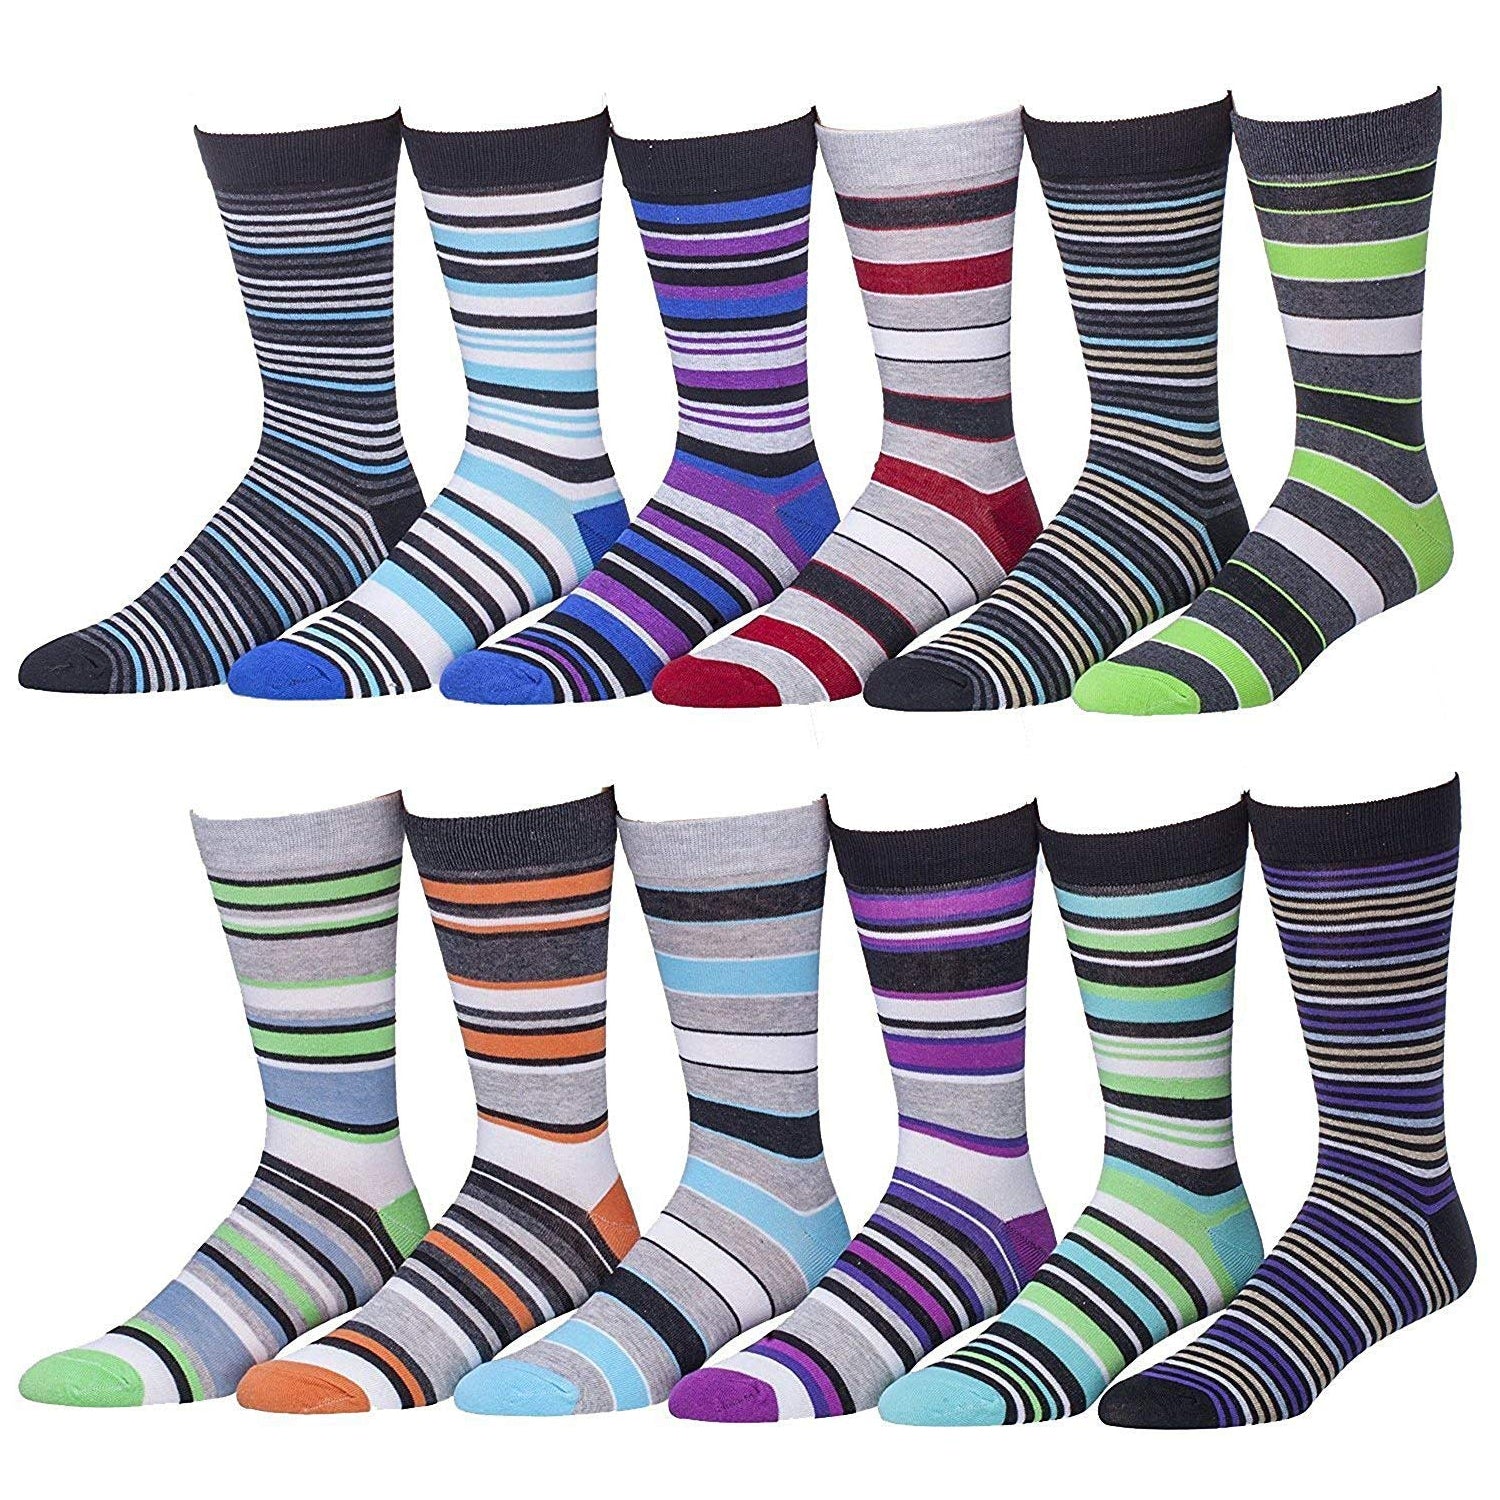 12 Pairs of Men's Dress Socks Assorted Colors and Patterns, Size 10-13